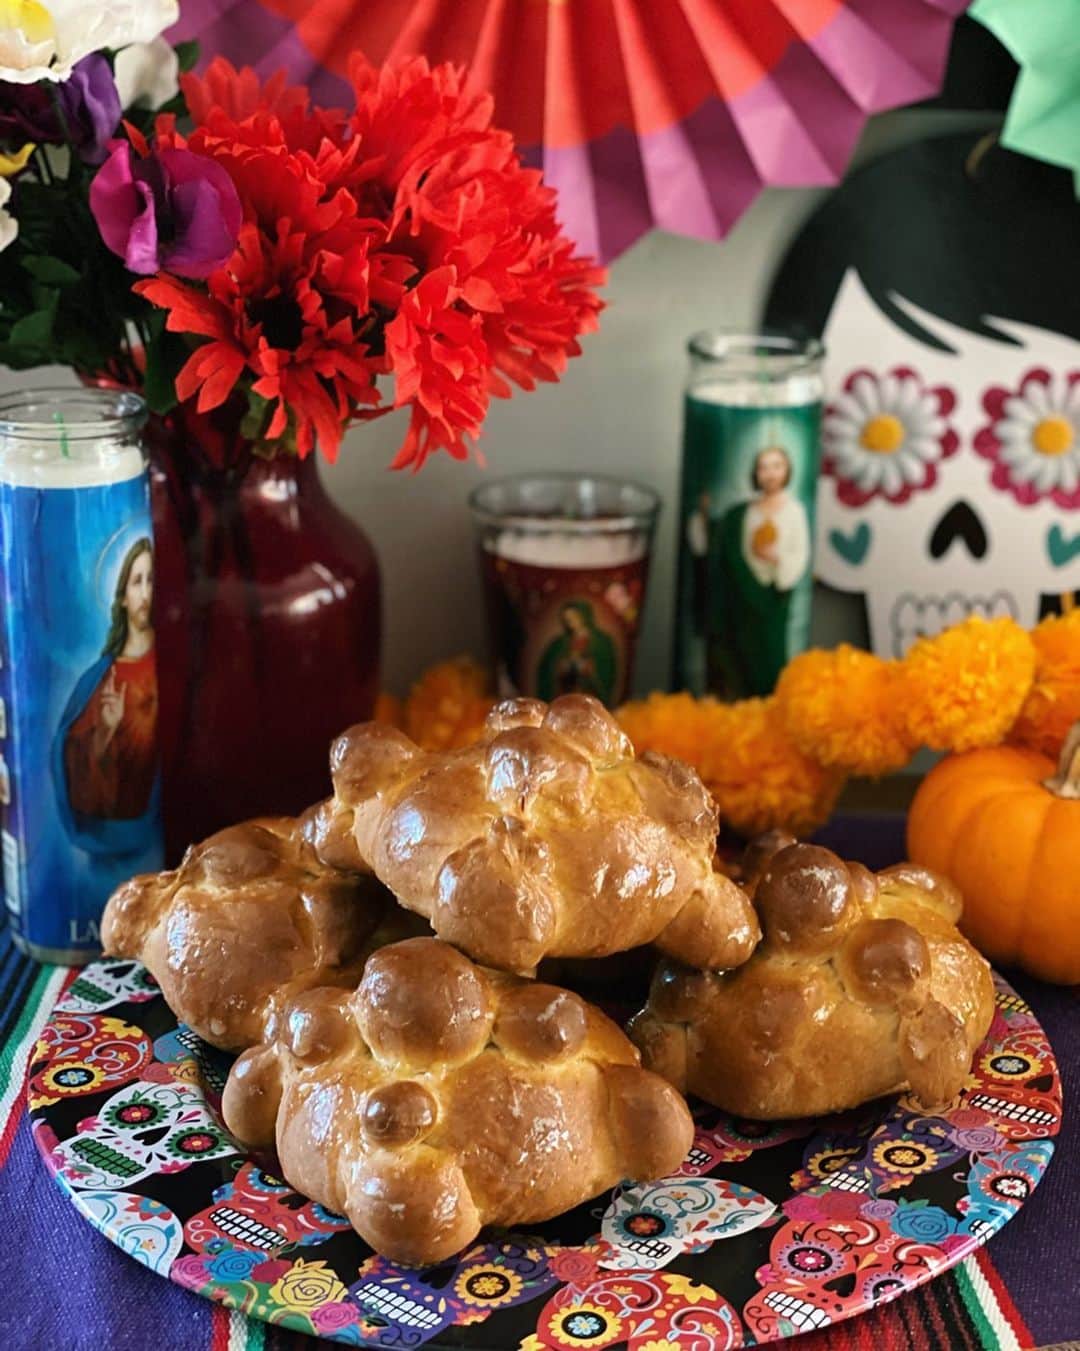 Antonietteのインスタグラム：「Make no bones about it, but these pan de muerto (bread of the dead) were delicious! Soft, warm and topped with a sweet orange glaze, these are perfect with hot chocolate or coffee. 😋 Having two kids of Mexican descent, we believe it is important for us to celebrate and preserve traditions that are significant to their culture. It helps us start our own traditions as we integrate them into our own family! Any excuse to try out new recipes really! 😆Feliz Día de Los Muertos! 💀」